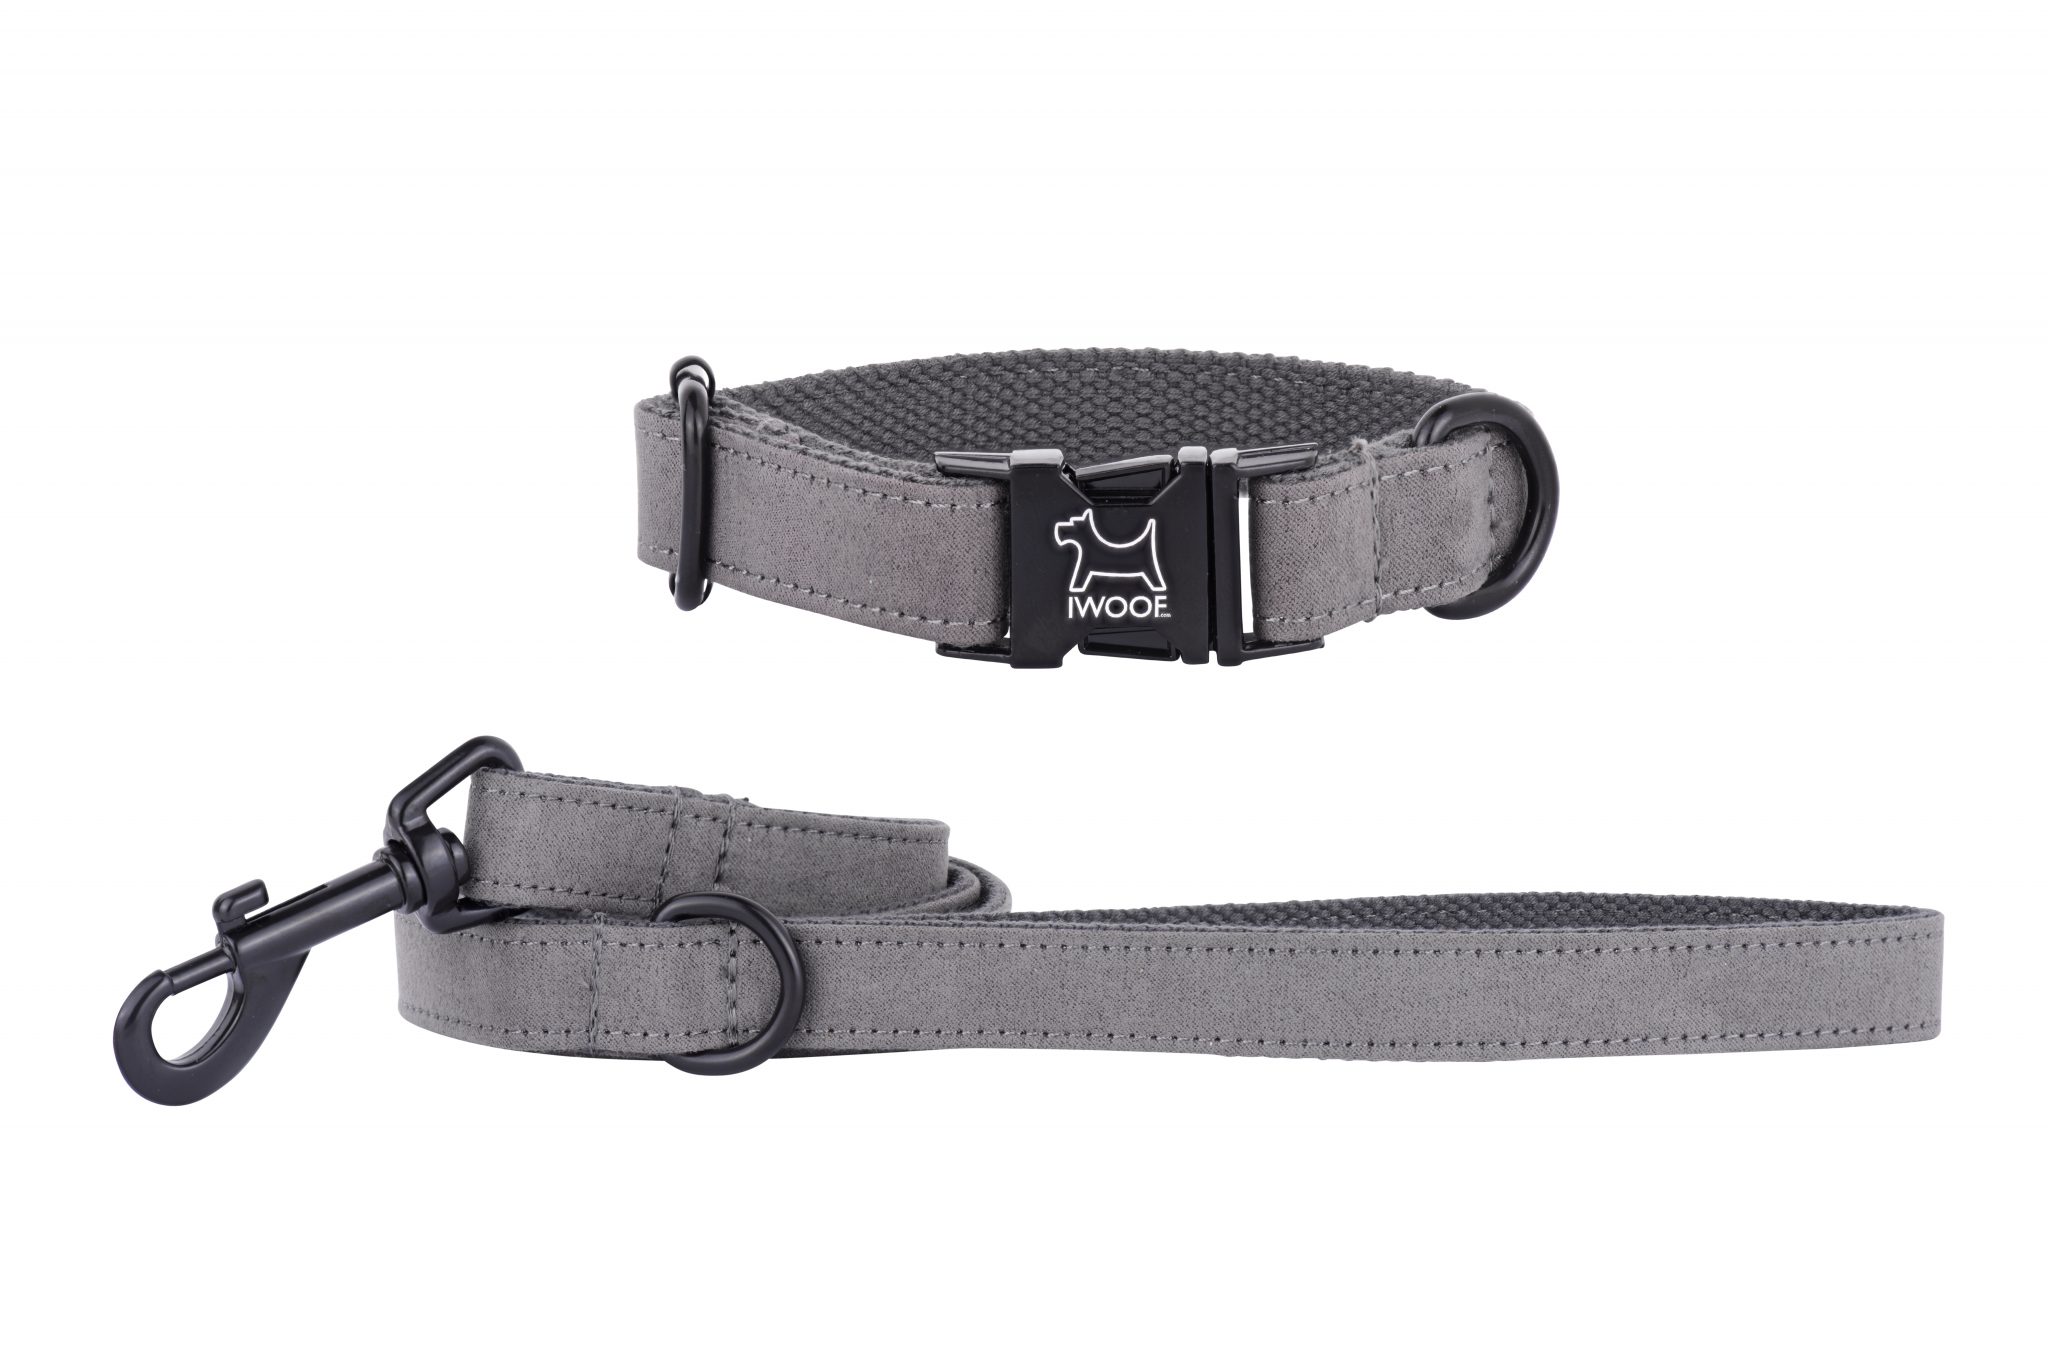 DOLPHIN Designer Dog Collar and Lead set in Black